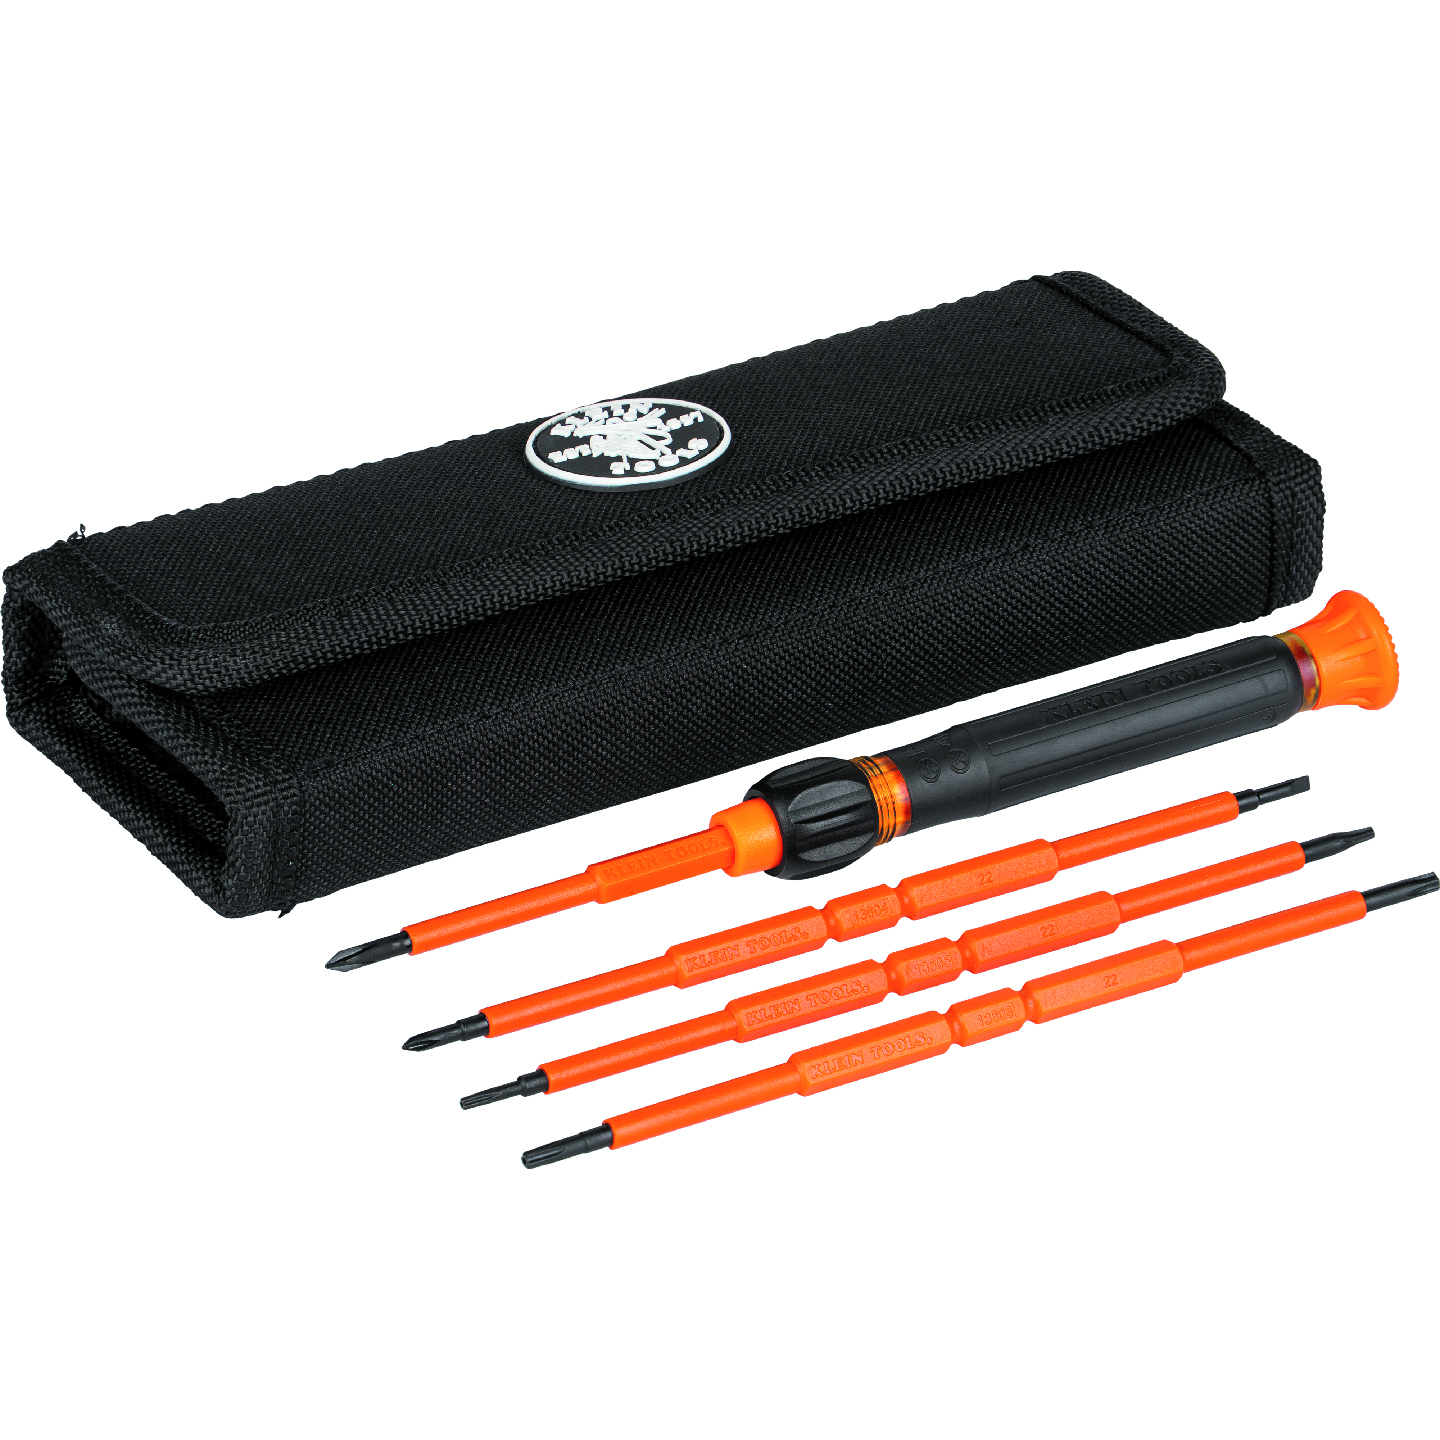 32584INSR 8-in-1 Insulated Precision Screwdriver Set with Case - Image